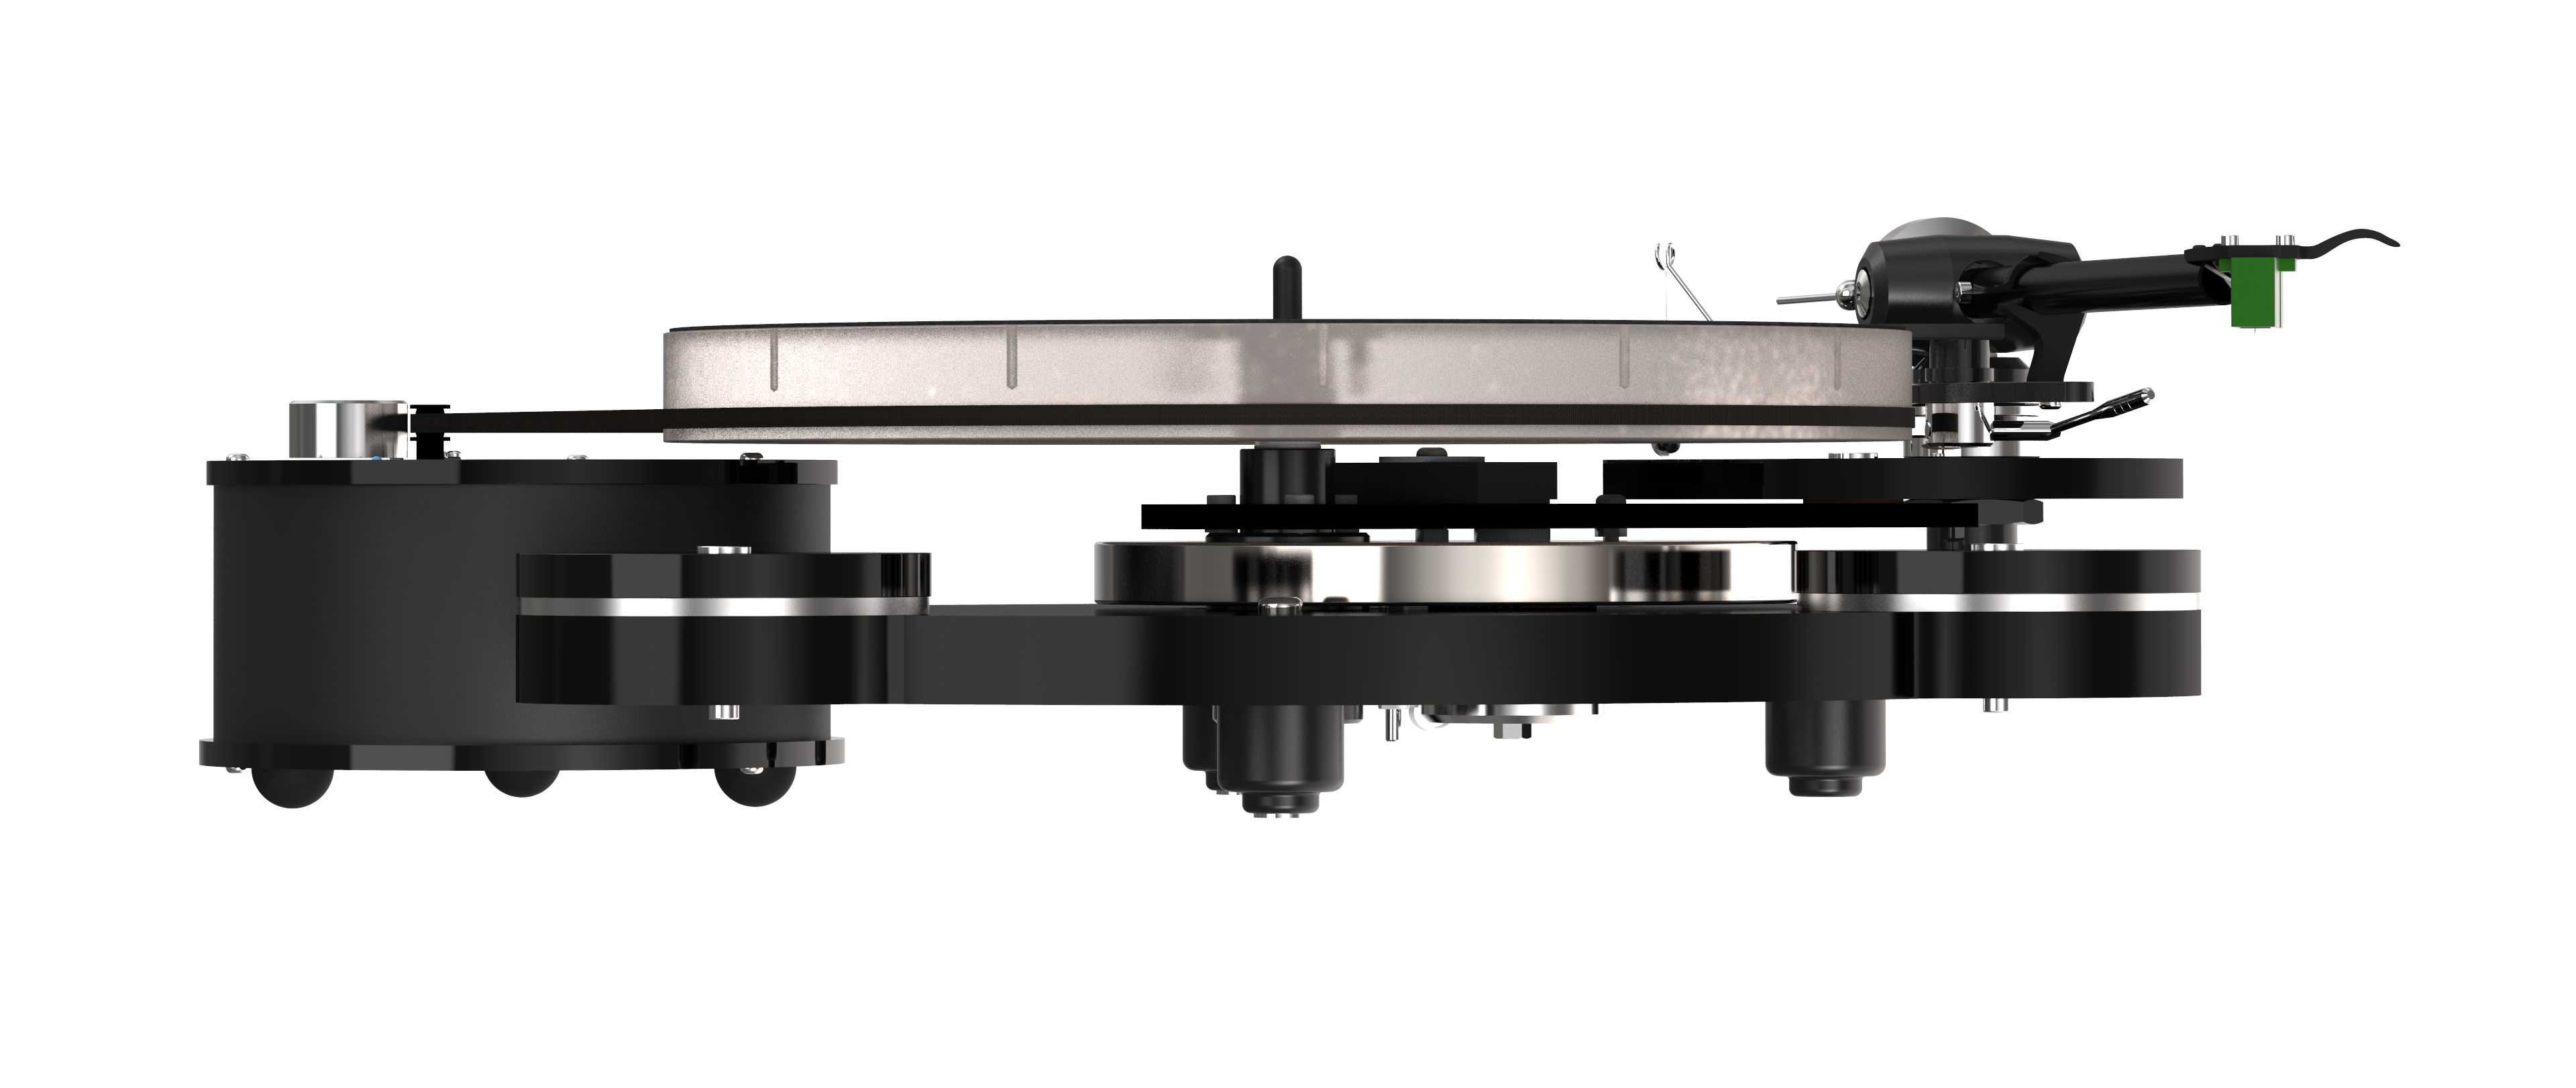 Origin Live Hi-Fi Calypso Turntable Motor Pod Silver tonearm a high end turntable for analogue vinyl audio playback with mid century mid-century retrostyling